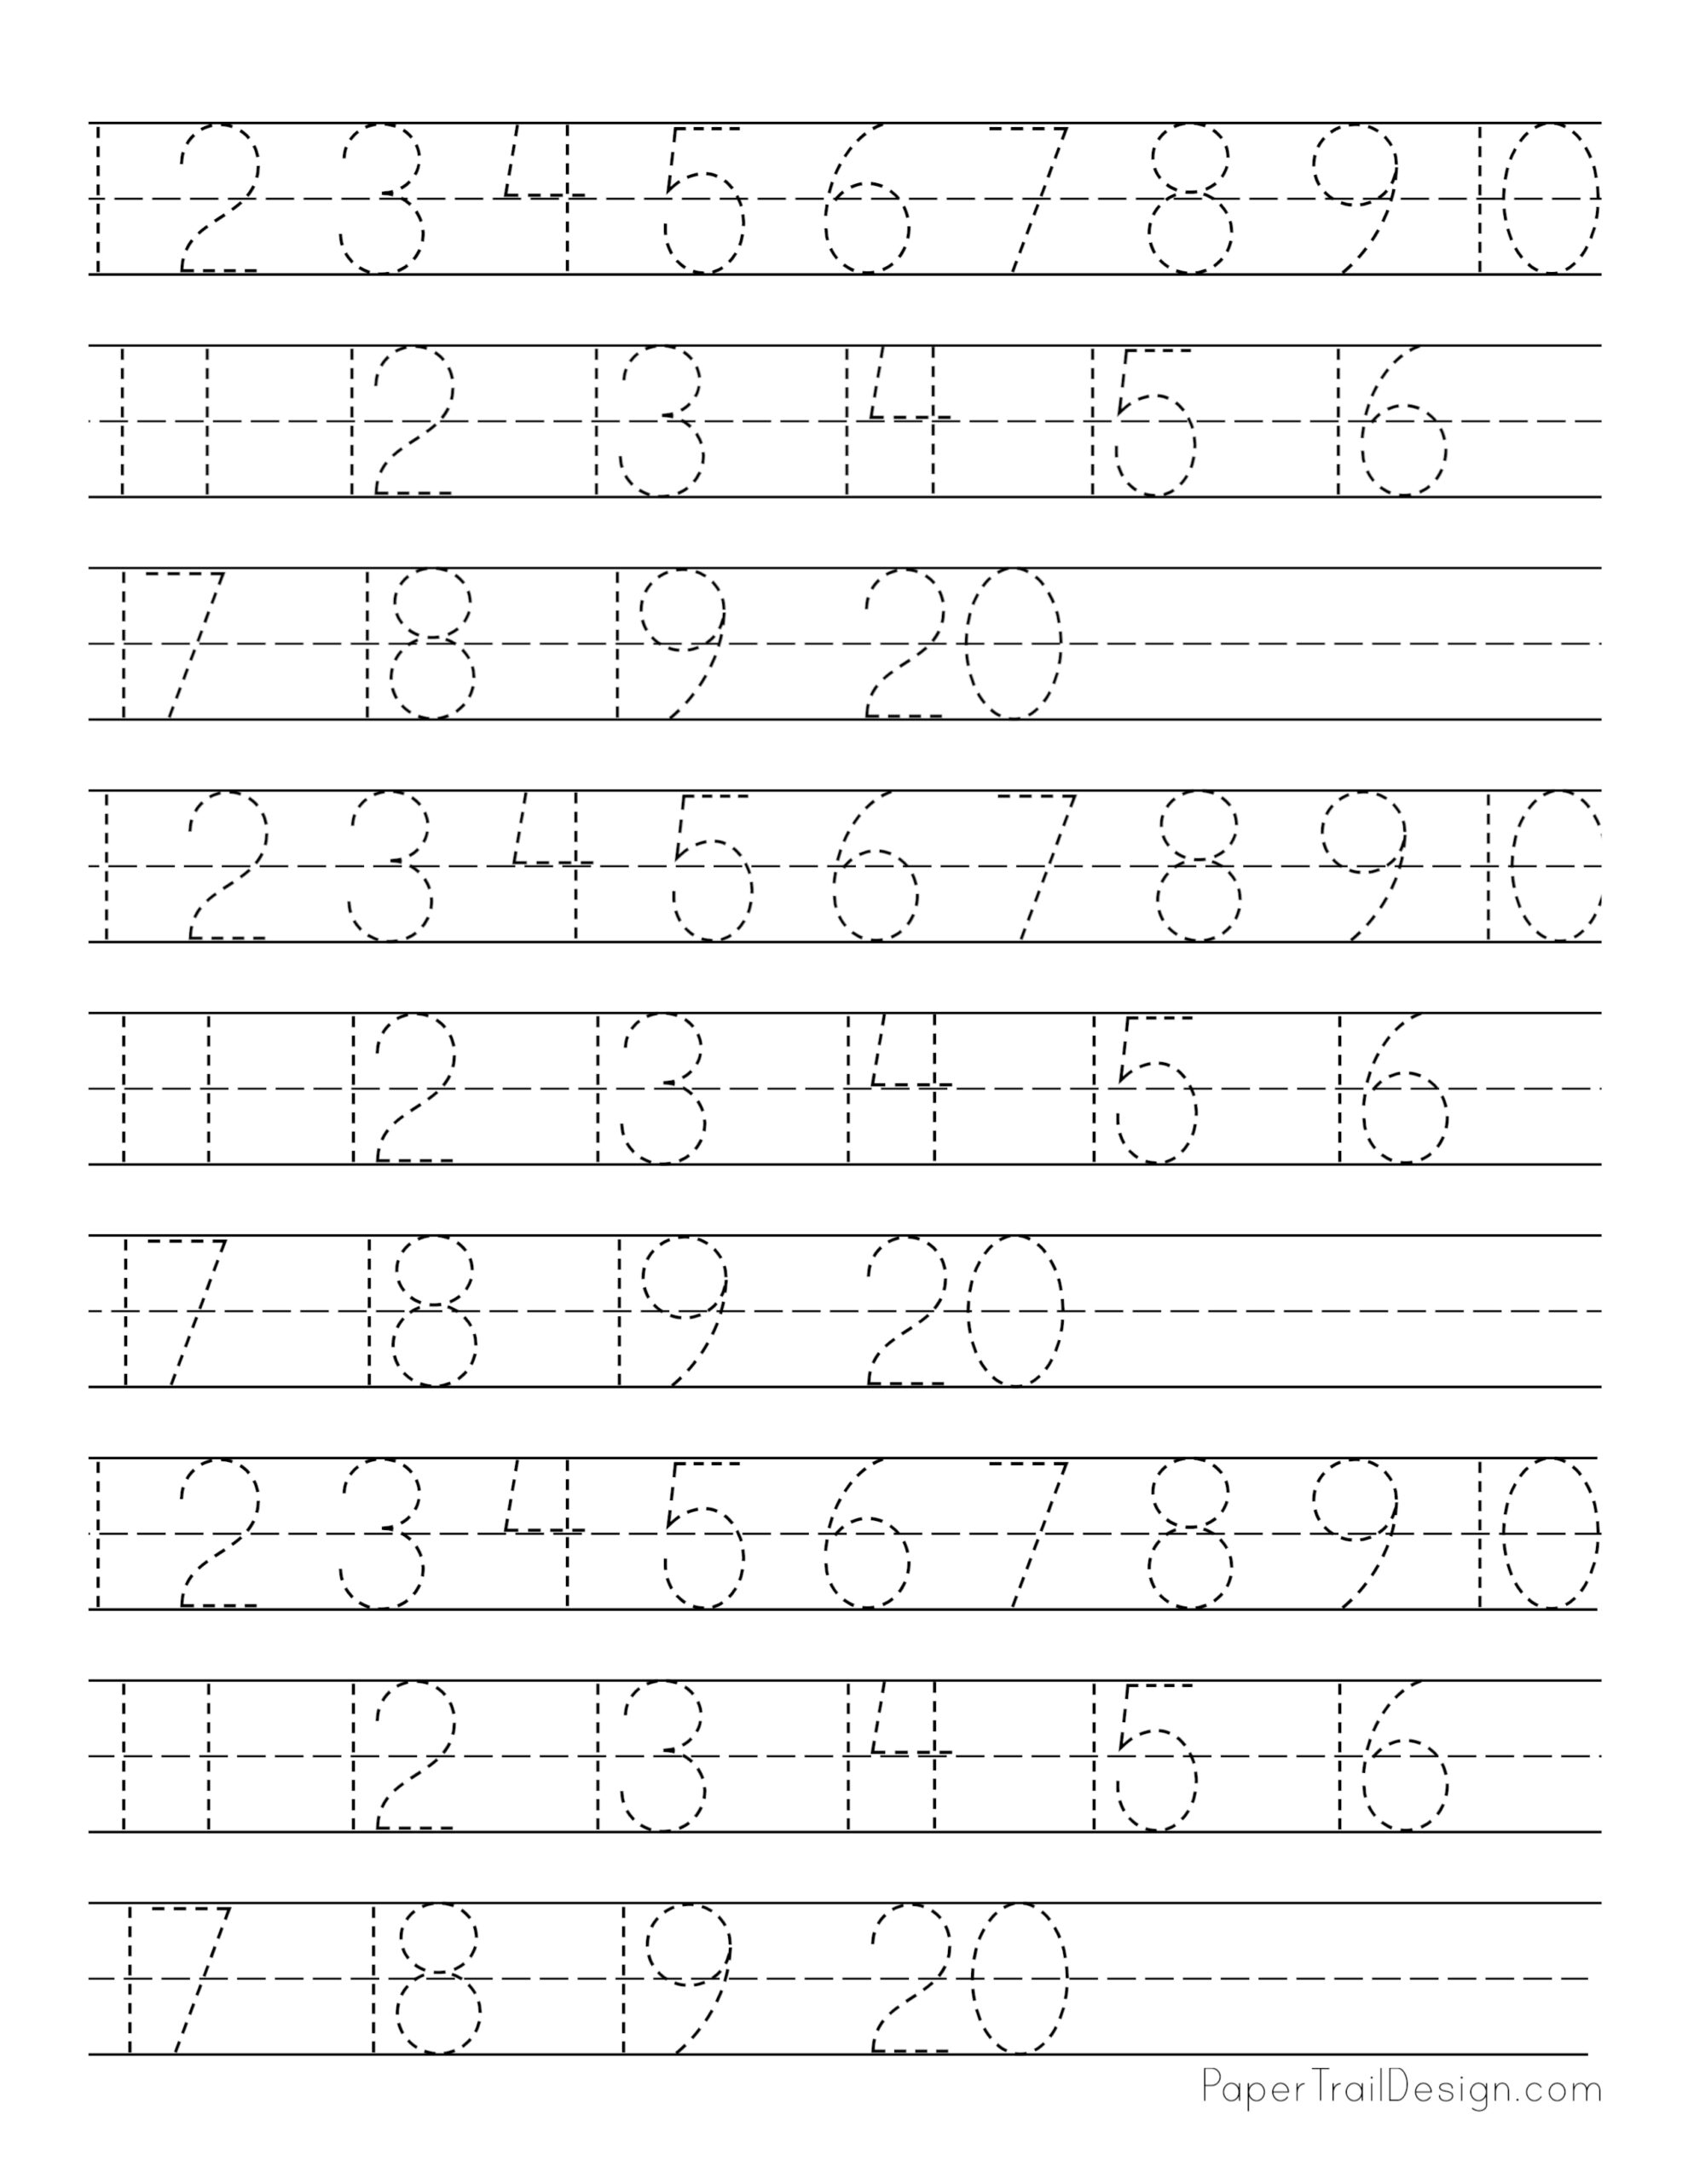 number-tracing-worksheets-1-20-pdf-printable-form-templates-and-letter